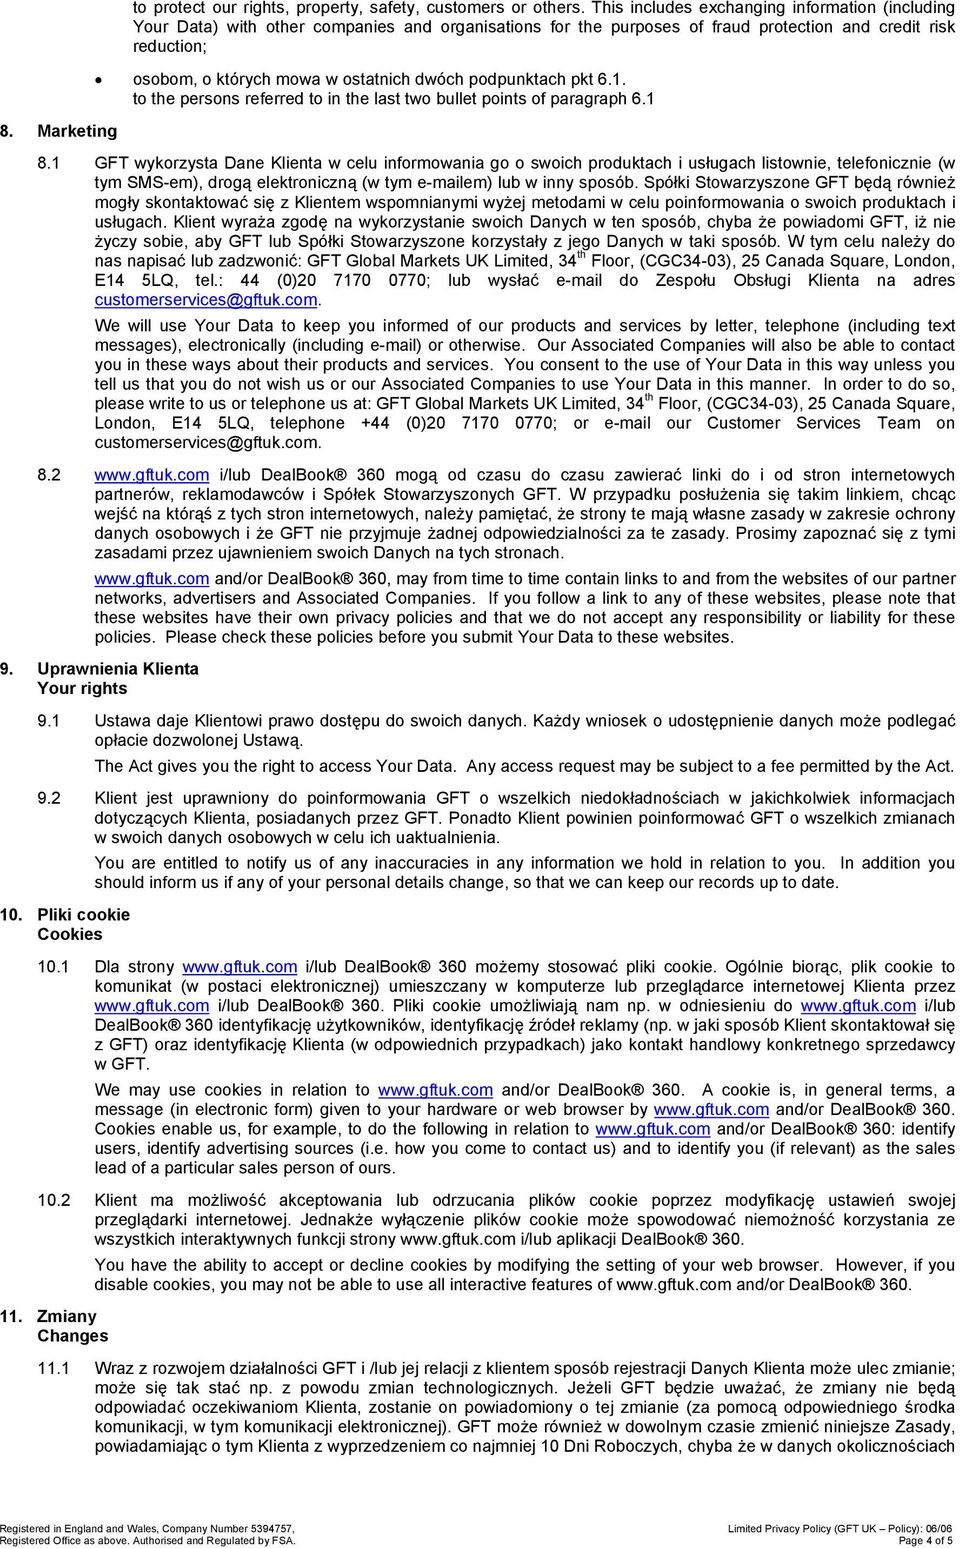 dwóch podpunktach pkt 6.1. to the persons referred to in the last two bullet points of paragraph 6.1 8. Marketing 8.